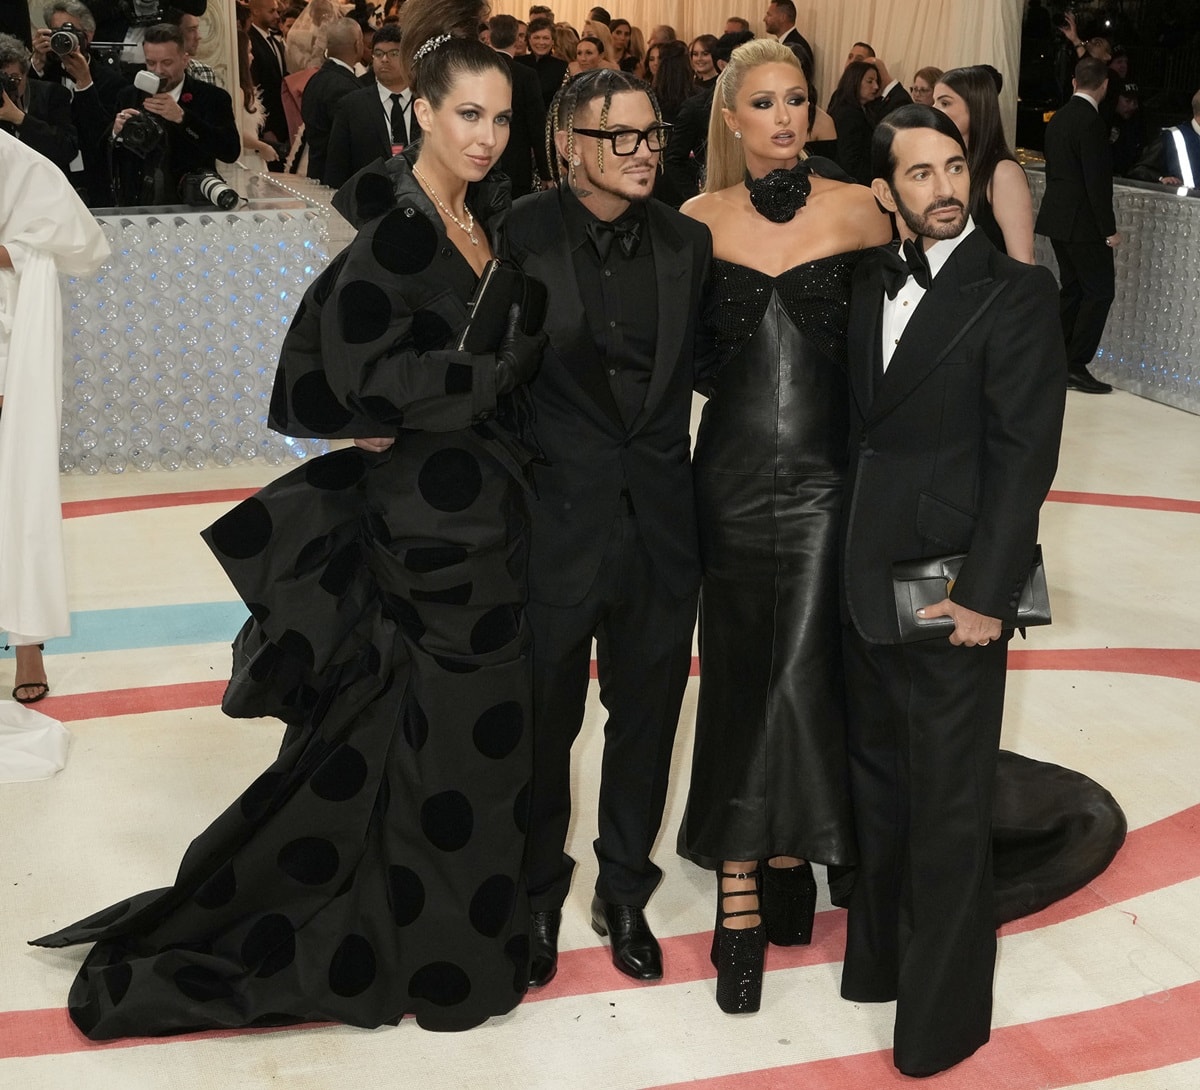 (L-R) Colby Mugrabi, an art collector and socialite who is married to David Mugrabi, Charly Defrancesco, a fashion designer and the husband of Marc Jacobs, Paris Hilton, and Marc Jacobs at the 2023 Met Gala Celebrating "Karl Lagerfeld: A Line Of Beauty"